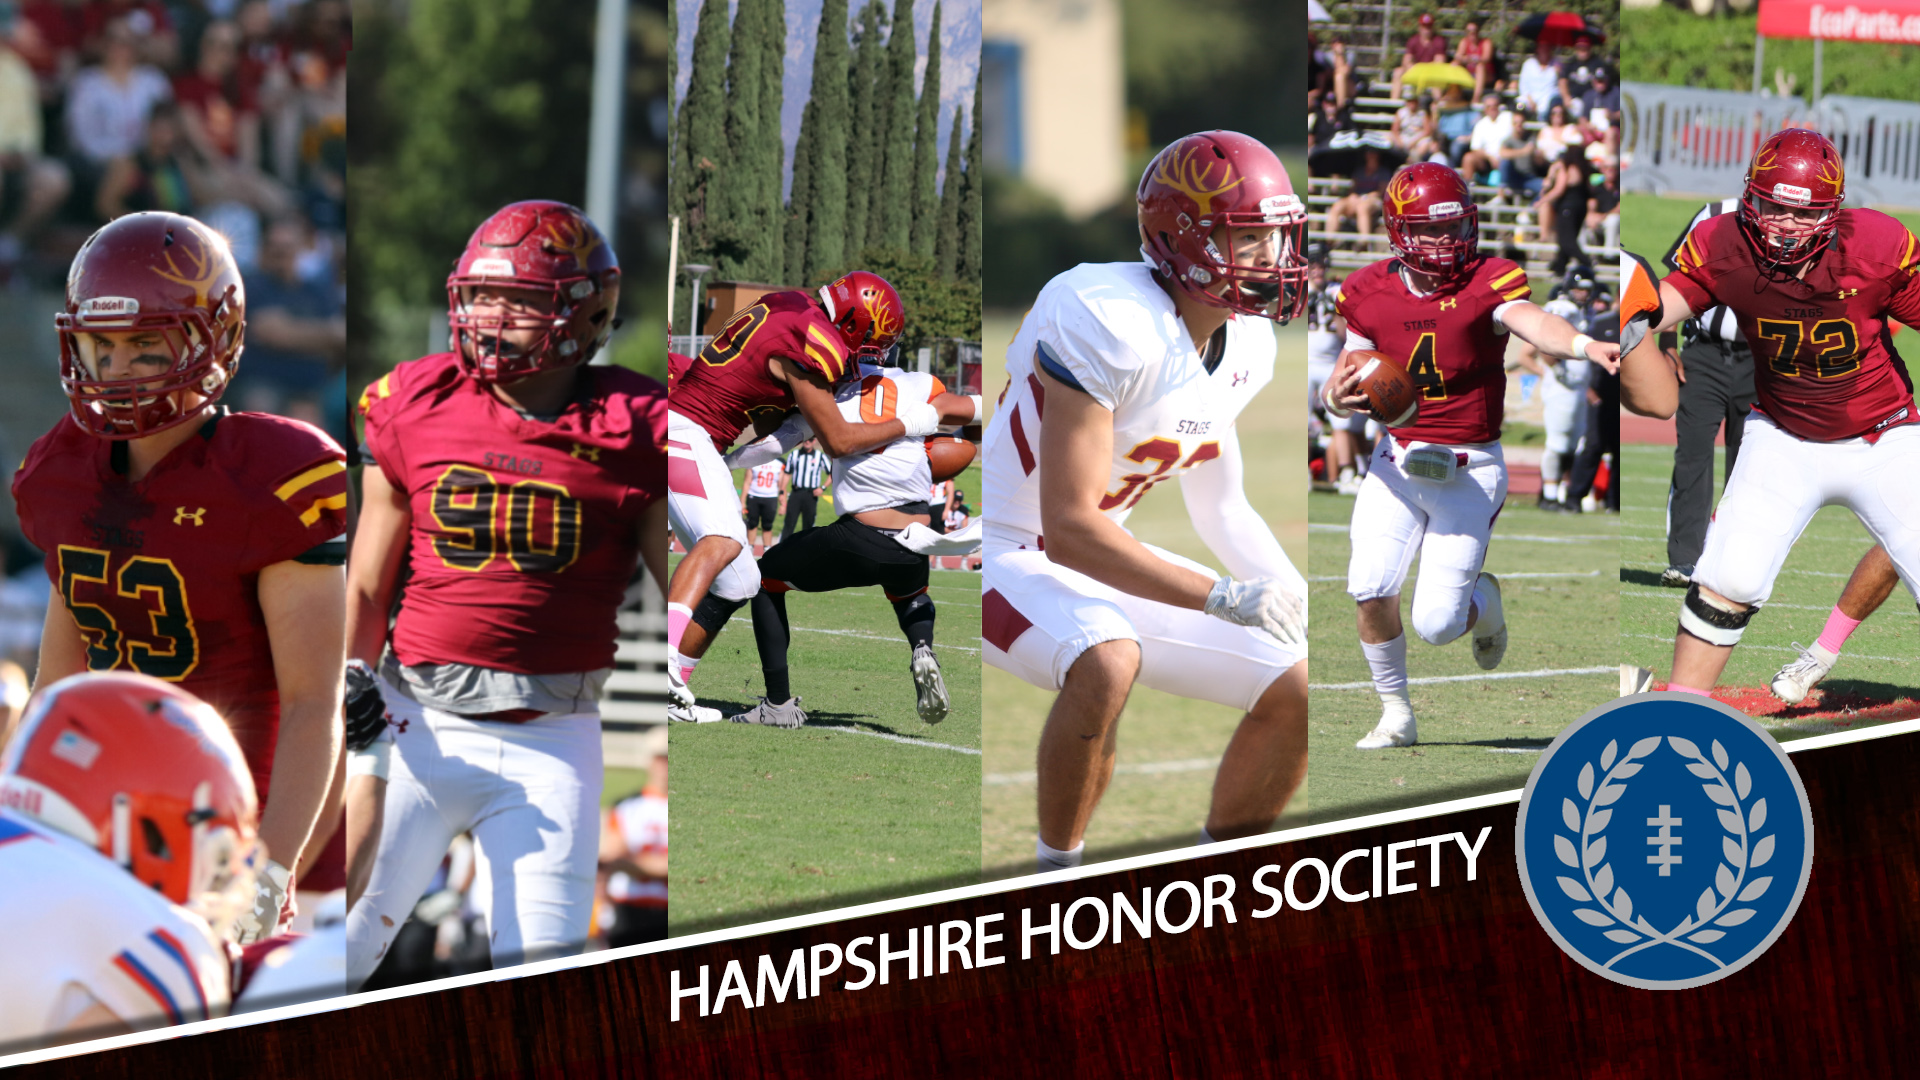 Action photos of Jack Cavellier, David Chen, Satya Mindich, Cade Moffatt, Jake Norville and Cooper Pryde. Words over the photo read Hampshire Honor Society, along with the National Football Foundation logo.